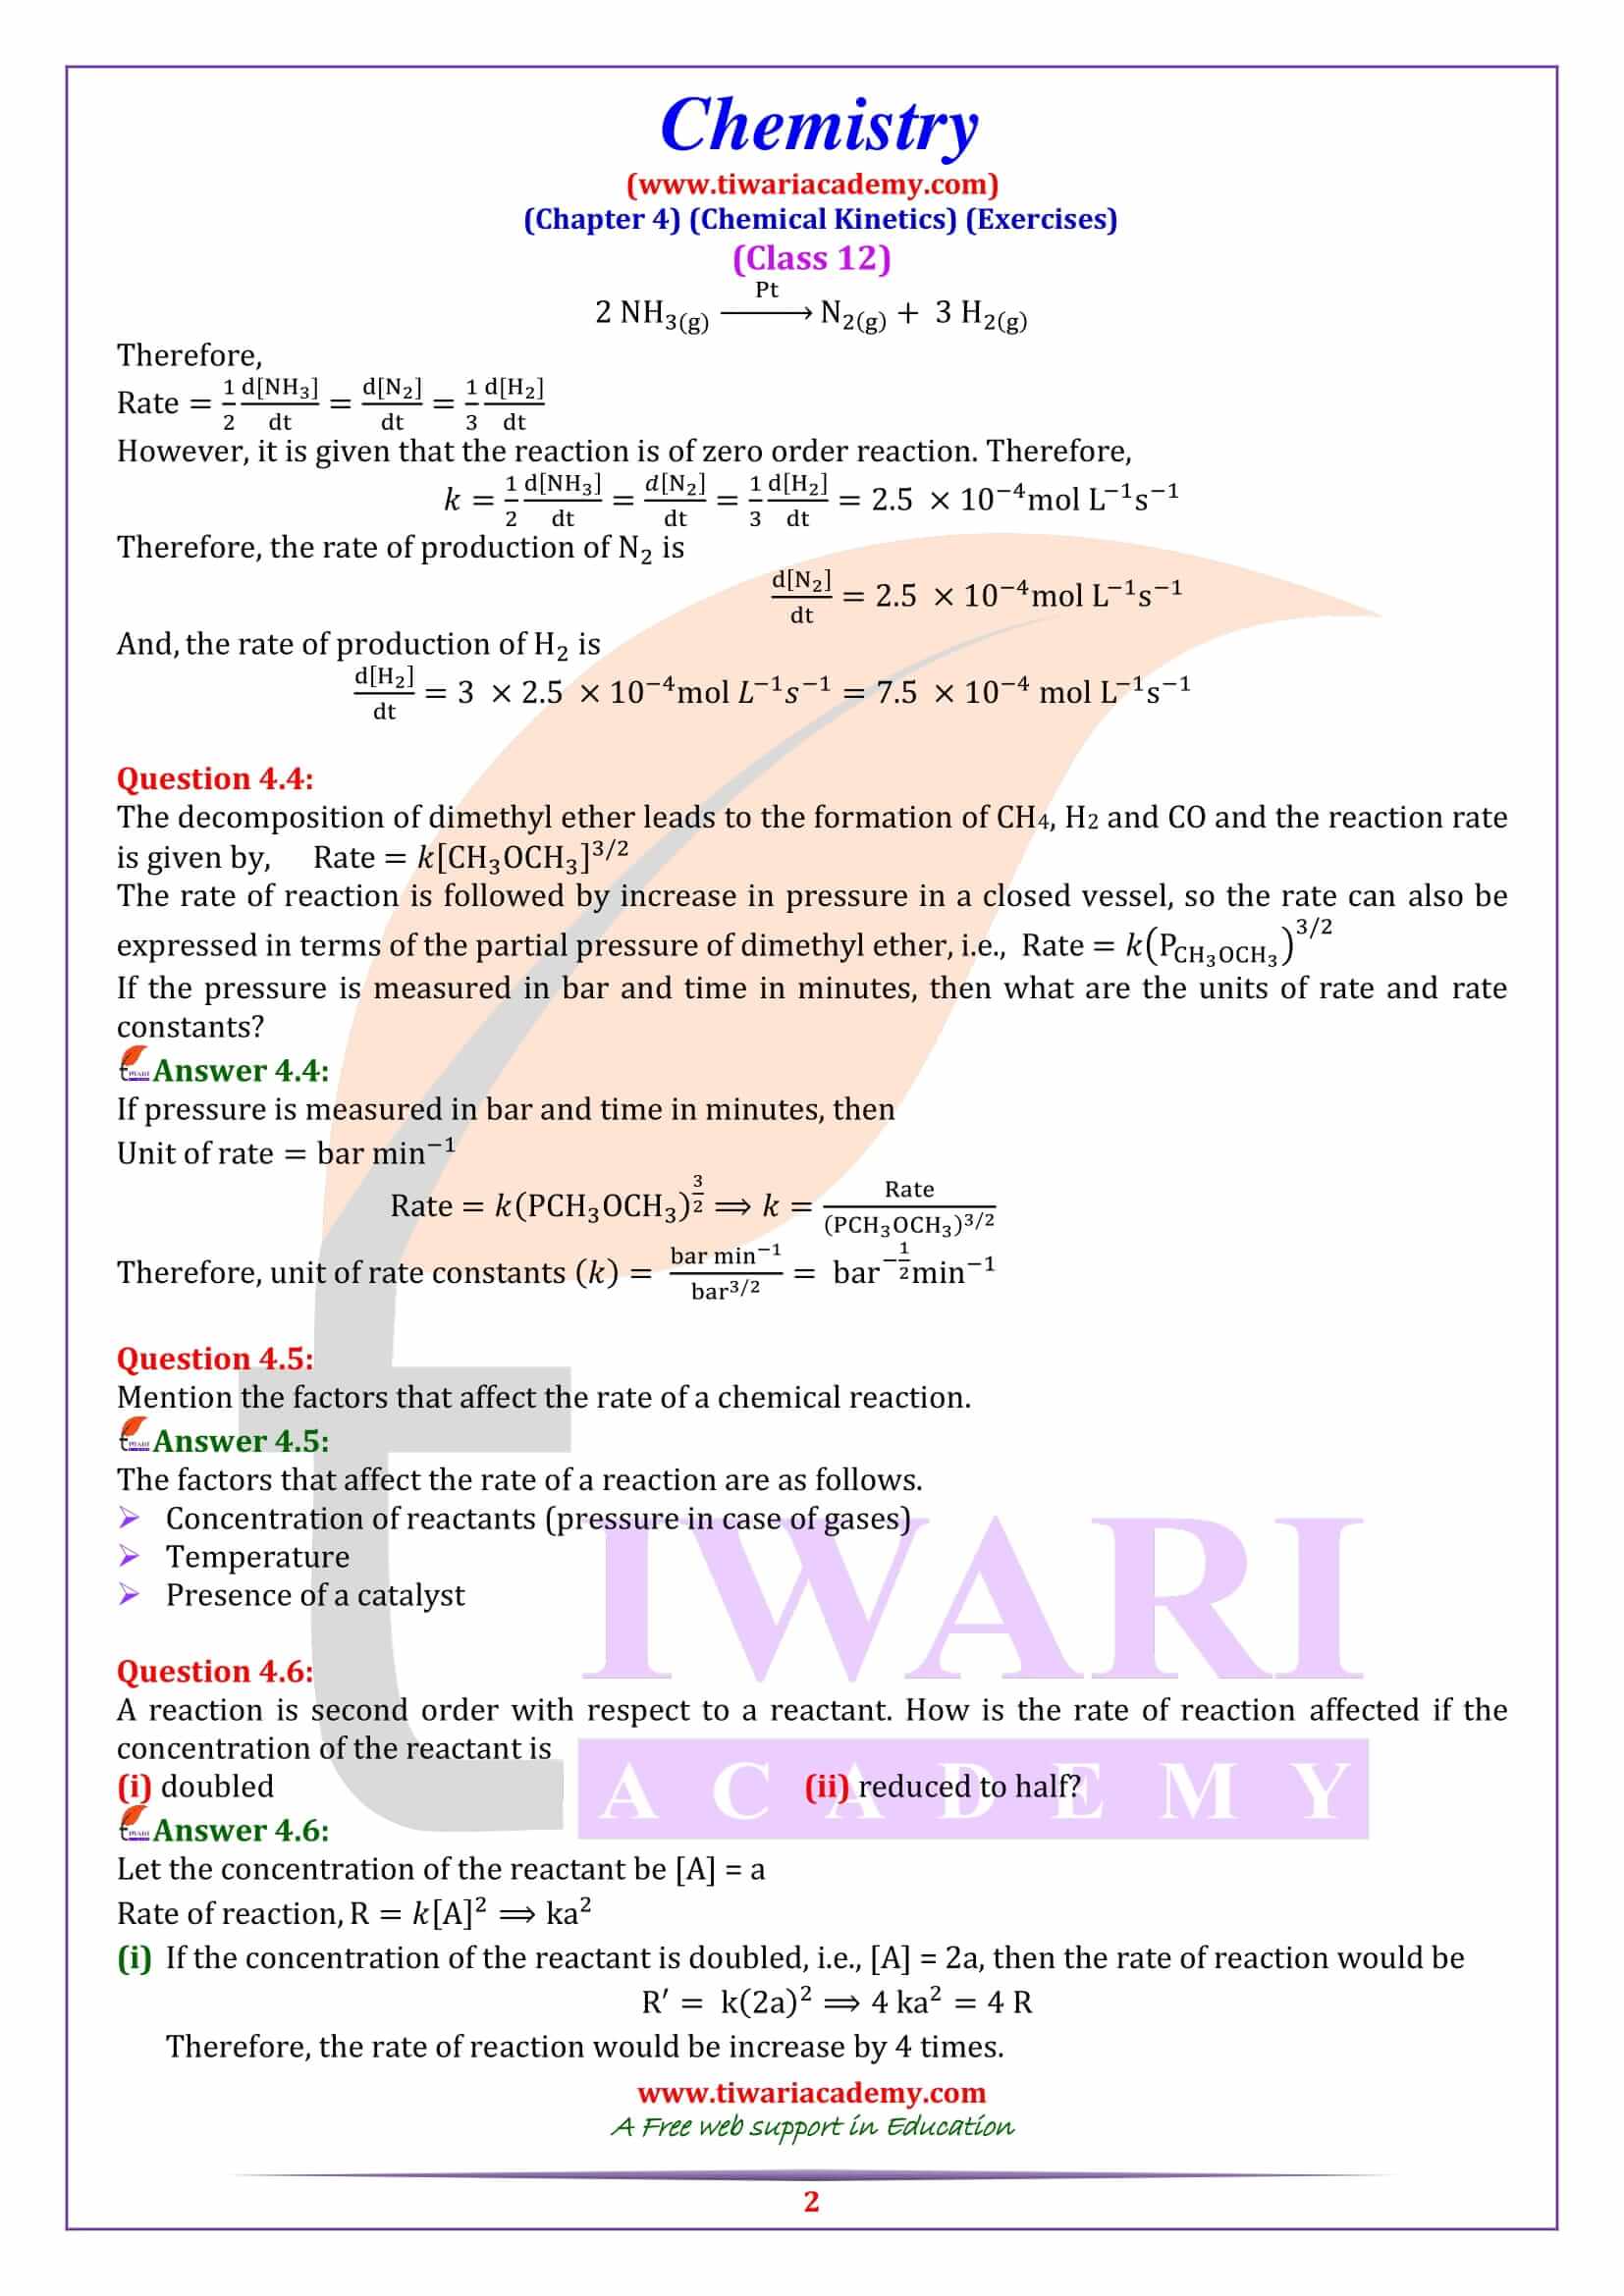 NCERT Solutions for Class 12 Chemistry Chapter 4